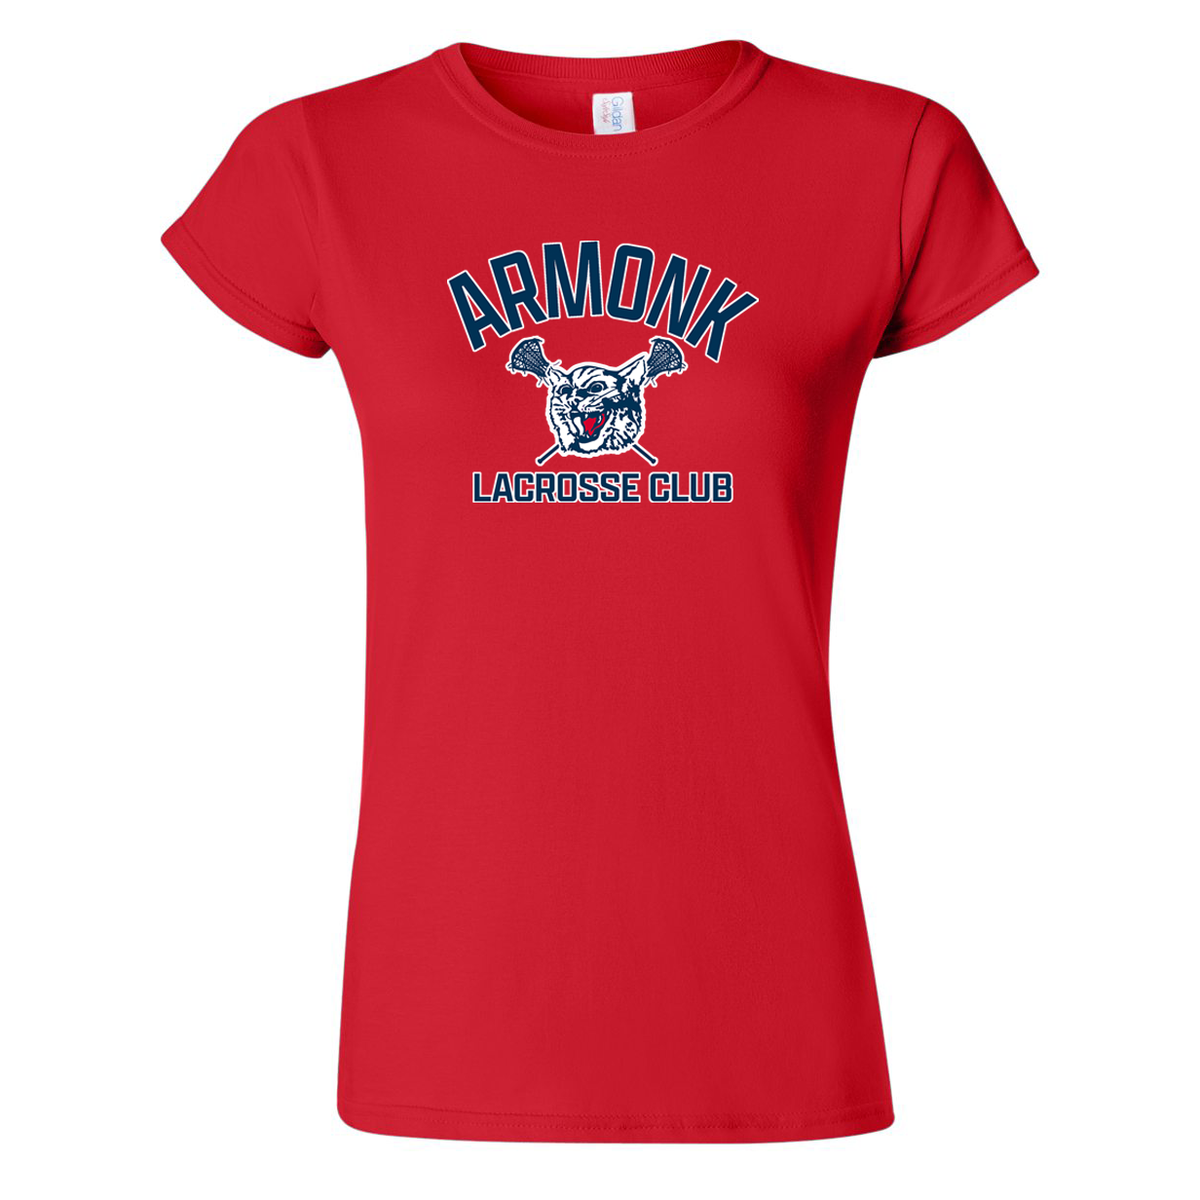 Armonk Lacrosse Club Softstyle Ladies T-Shirt (Adult Only)